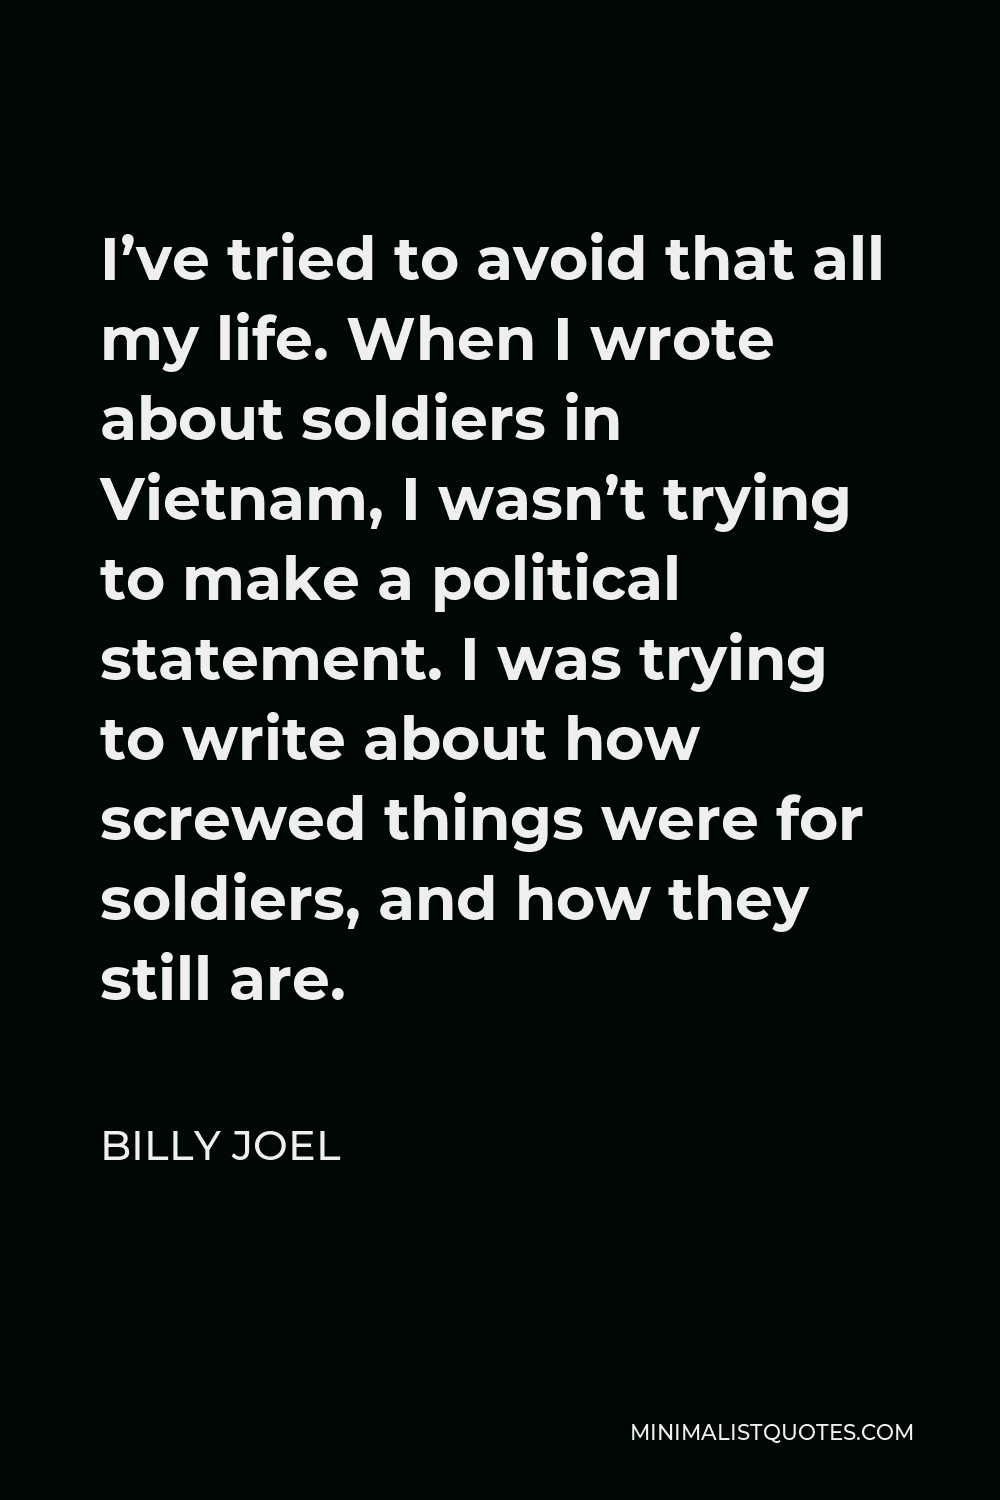 Billy Joel Quote - I’ve tried to avoid that all my life. When I wrote about soldiers in Vietnam, I wasn’t trying to make a political statement. I was trying to write about how screwed things were for soldiers, and how they still are.